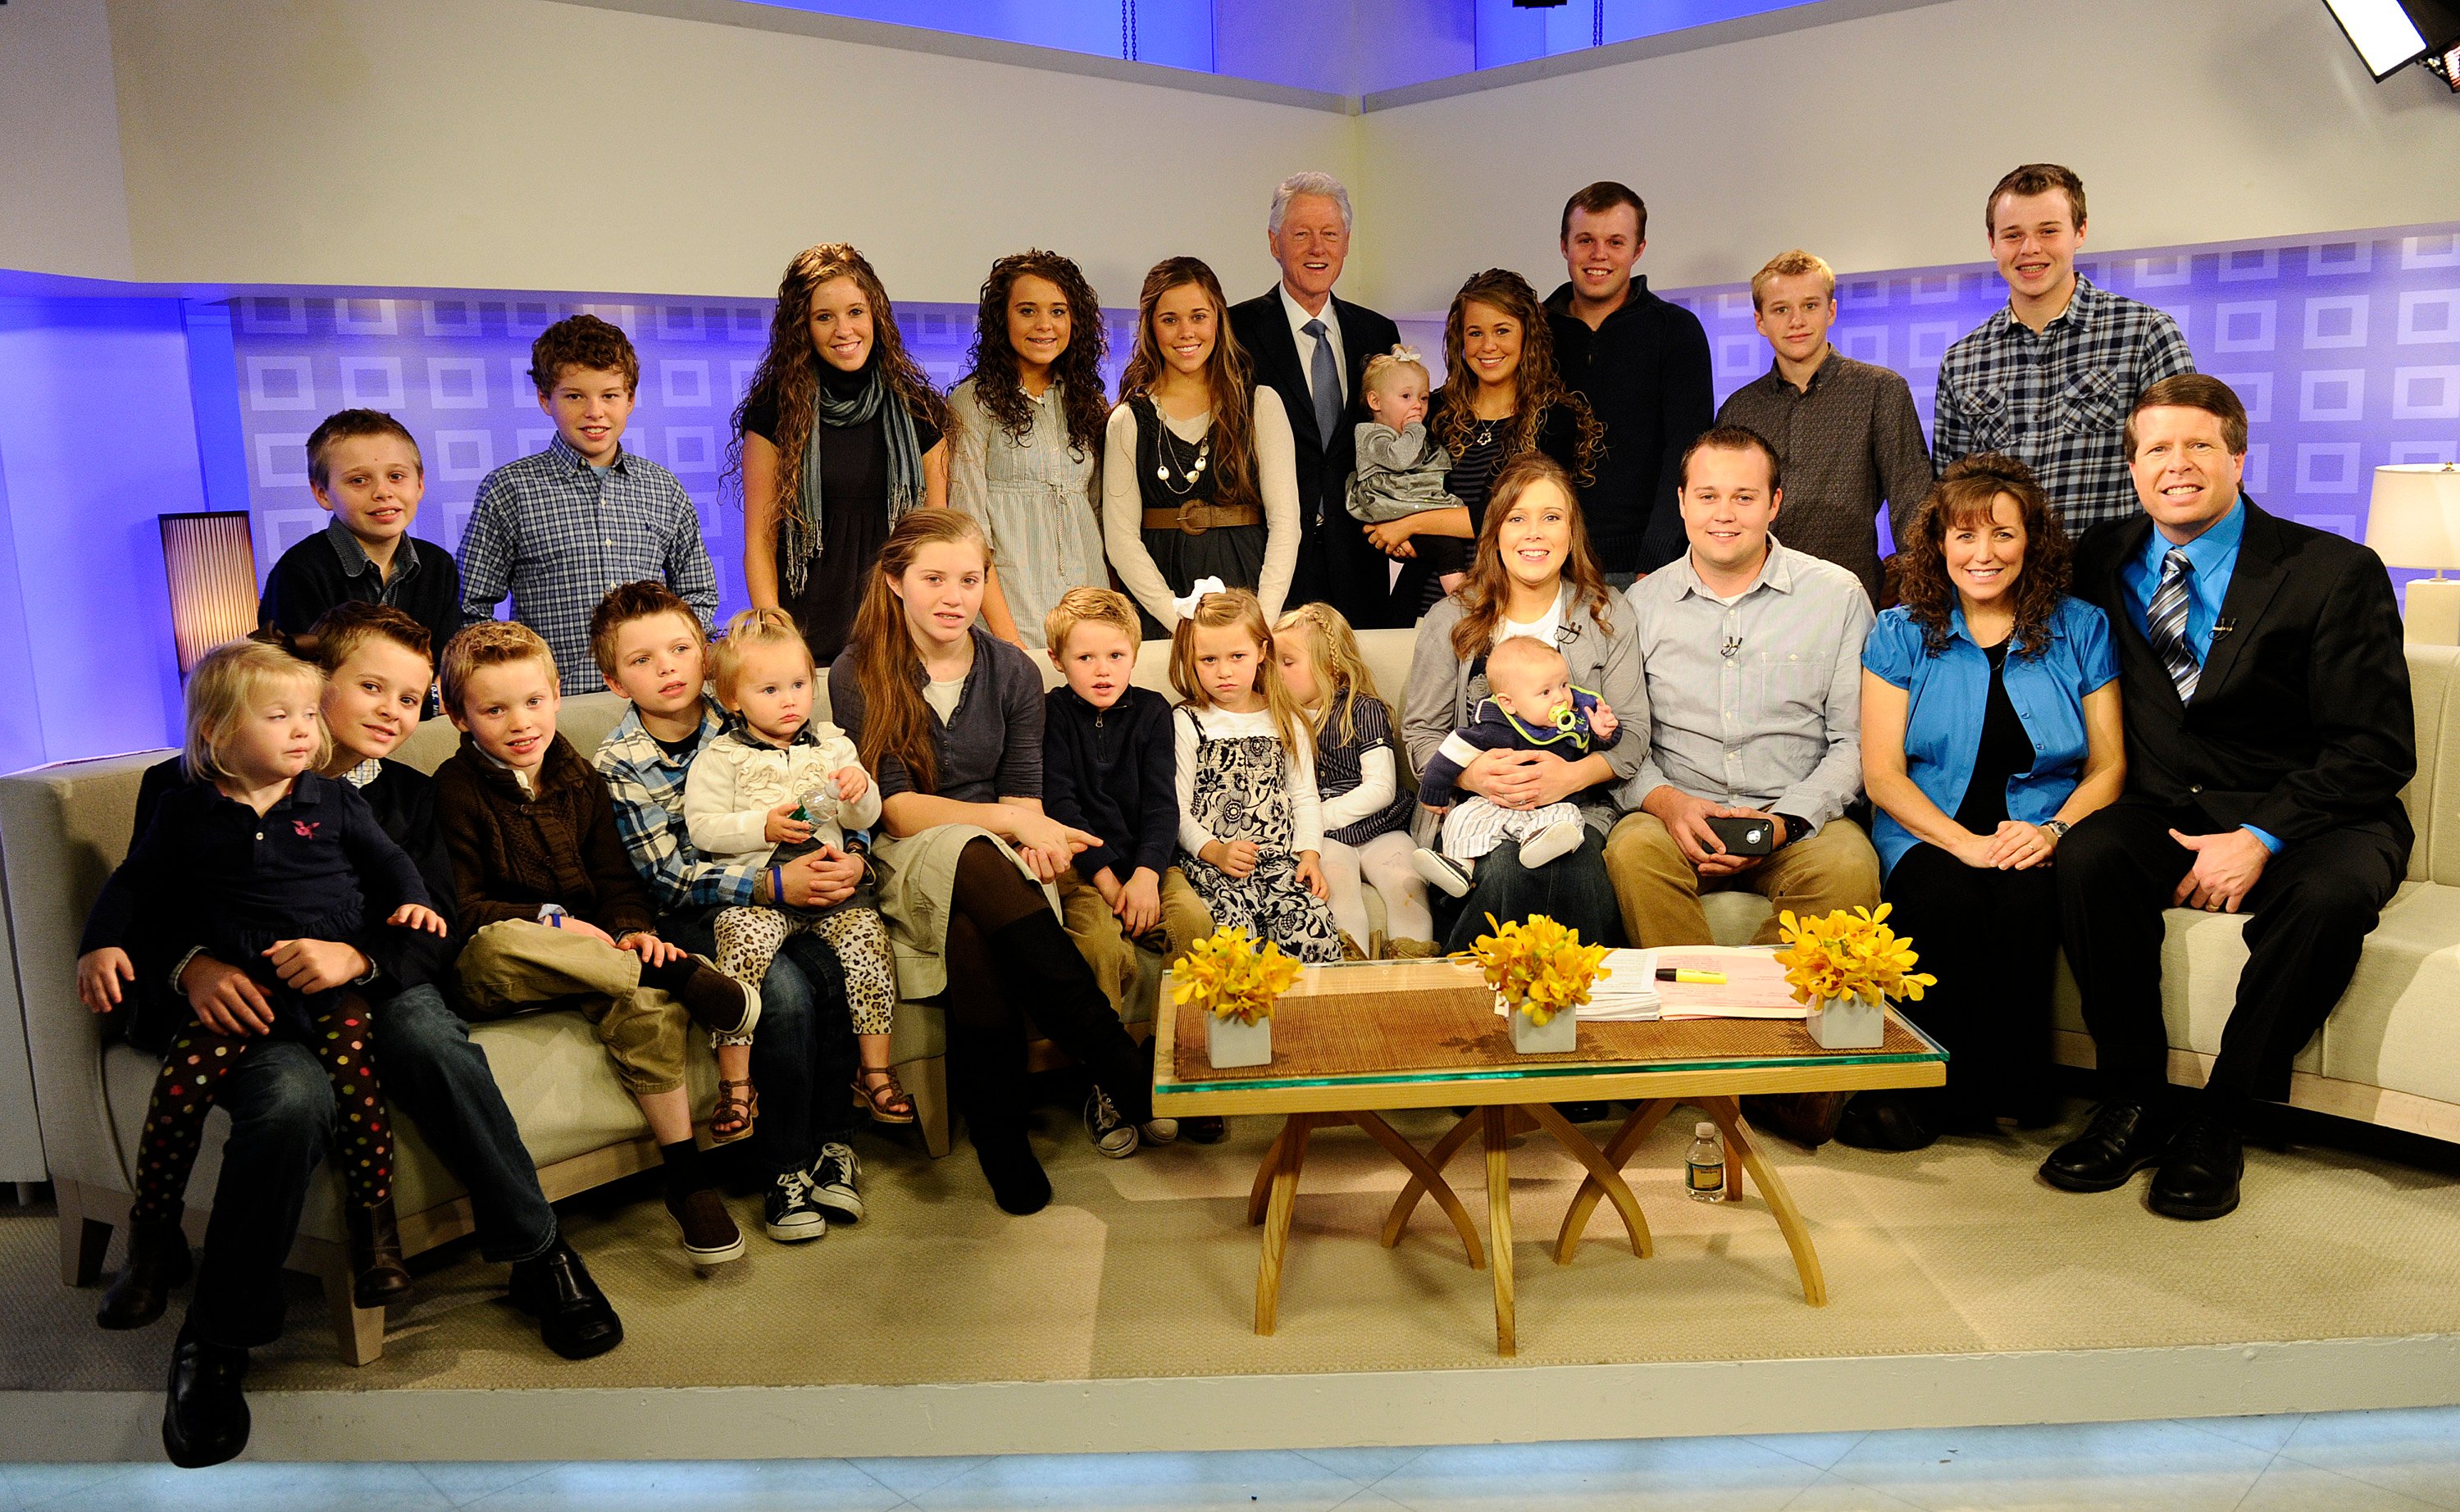 Members of the Duggar family on the Today show